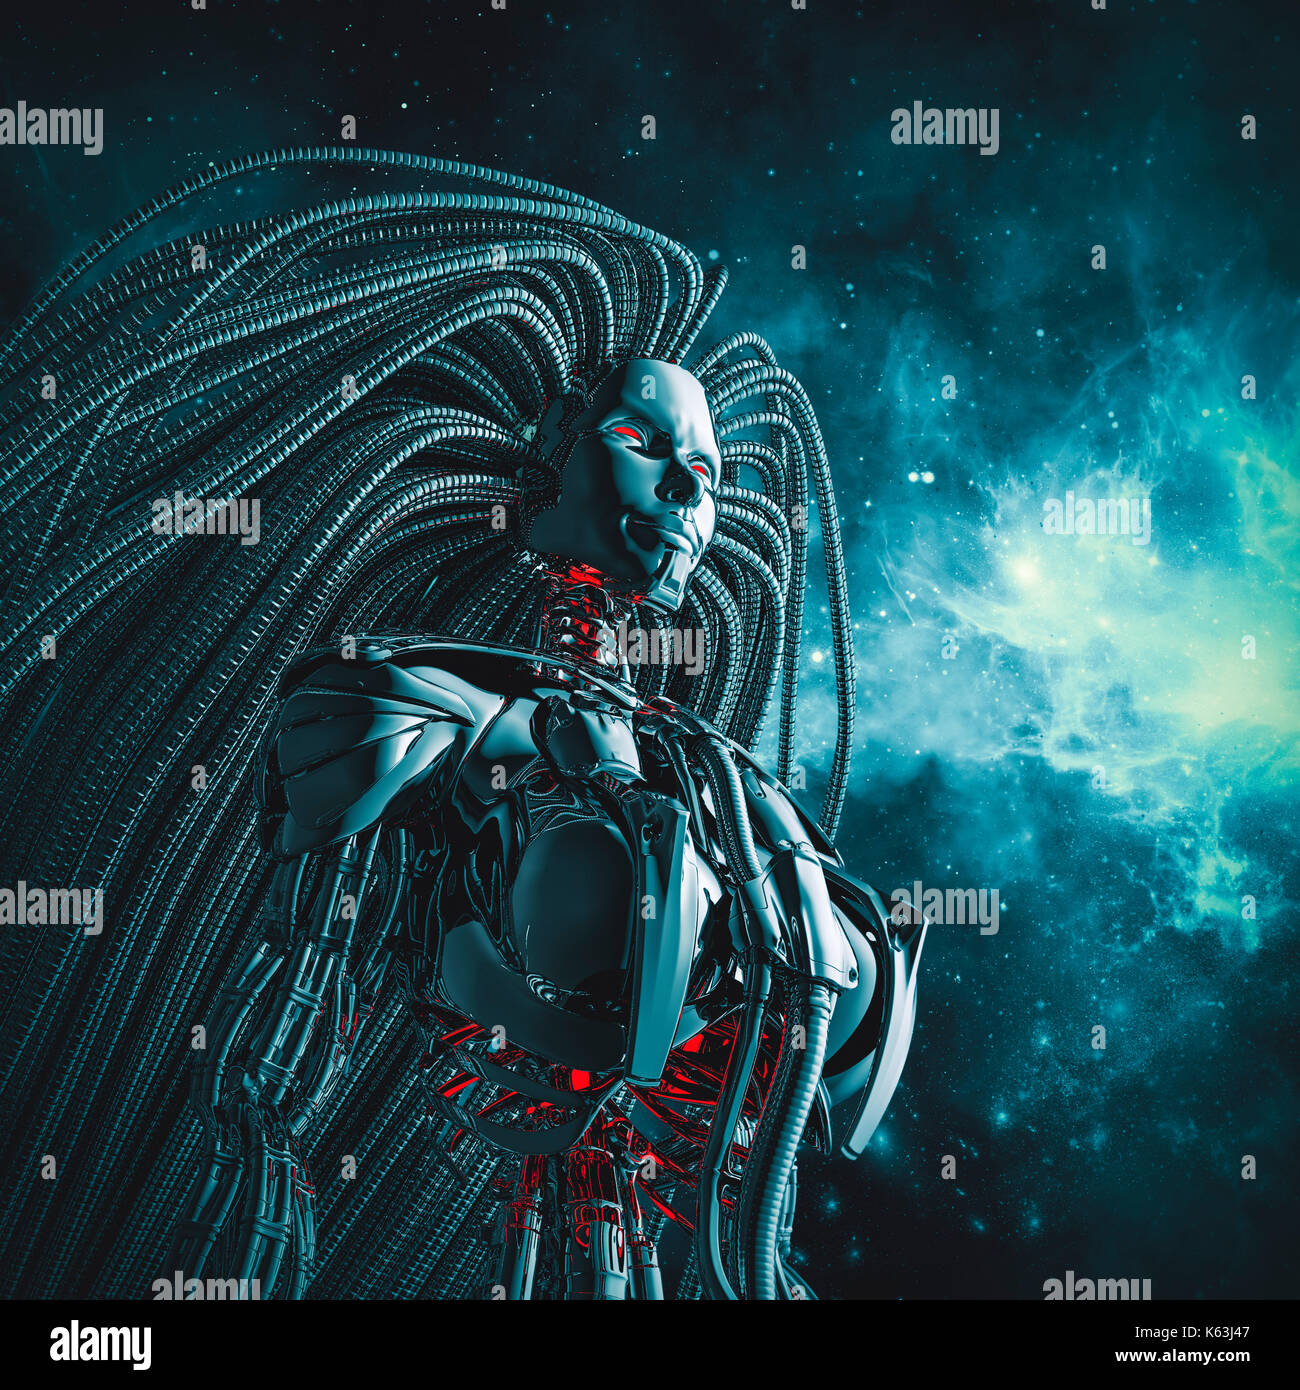 Female cyborg space / 3D illustration of metallic female android with flowing tentacled hair gazing into space Stock Photo